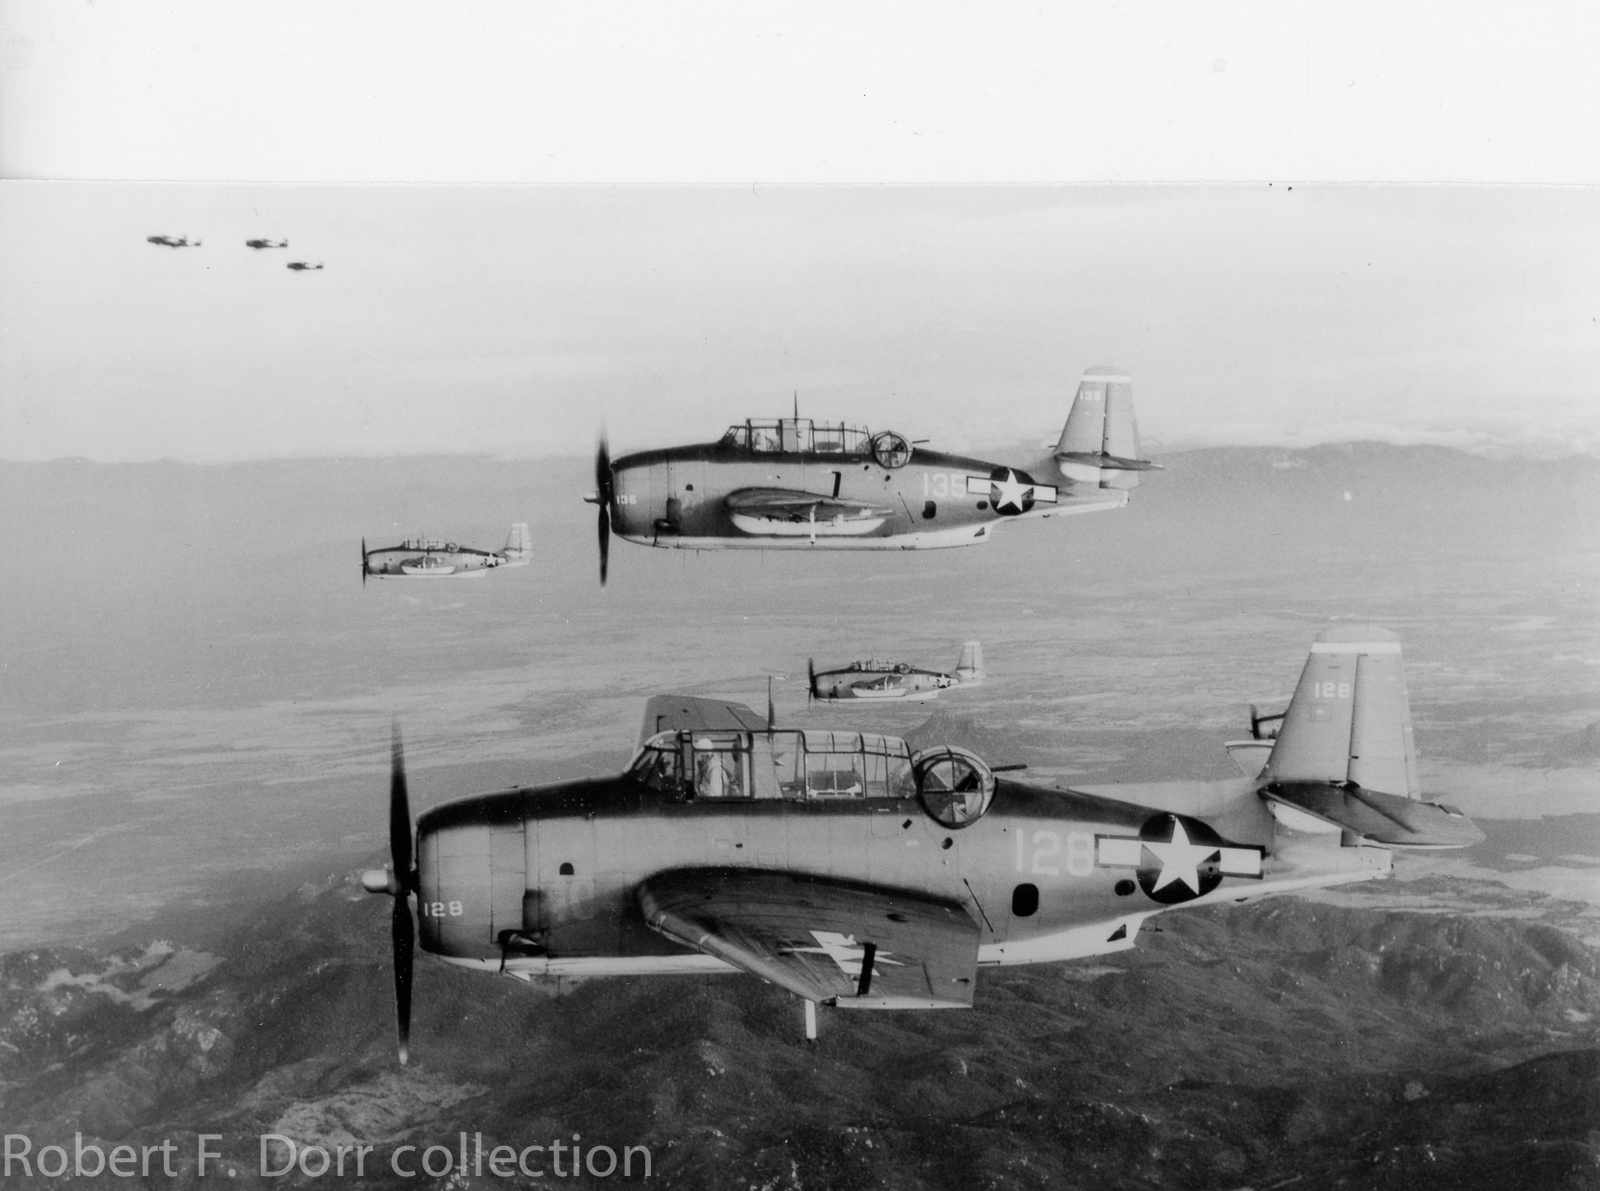 These are TBM-3 Avengers of squadron VT-4 from USS Essex (CV 9) on a combat mission in the Philippines on January 12, 1945. (U.S. Navy photo via Robert F. Dorr collection)